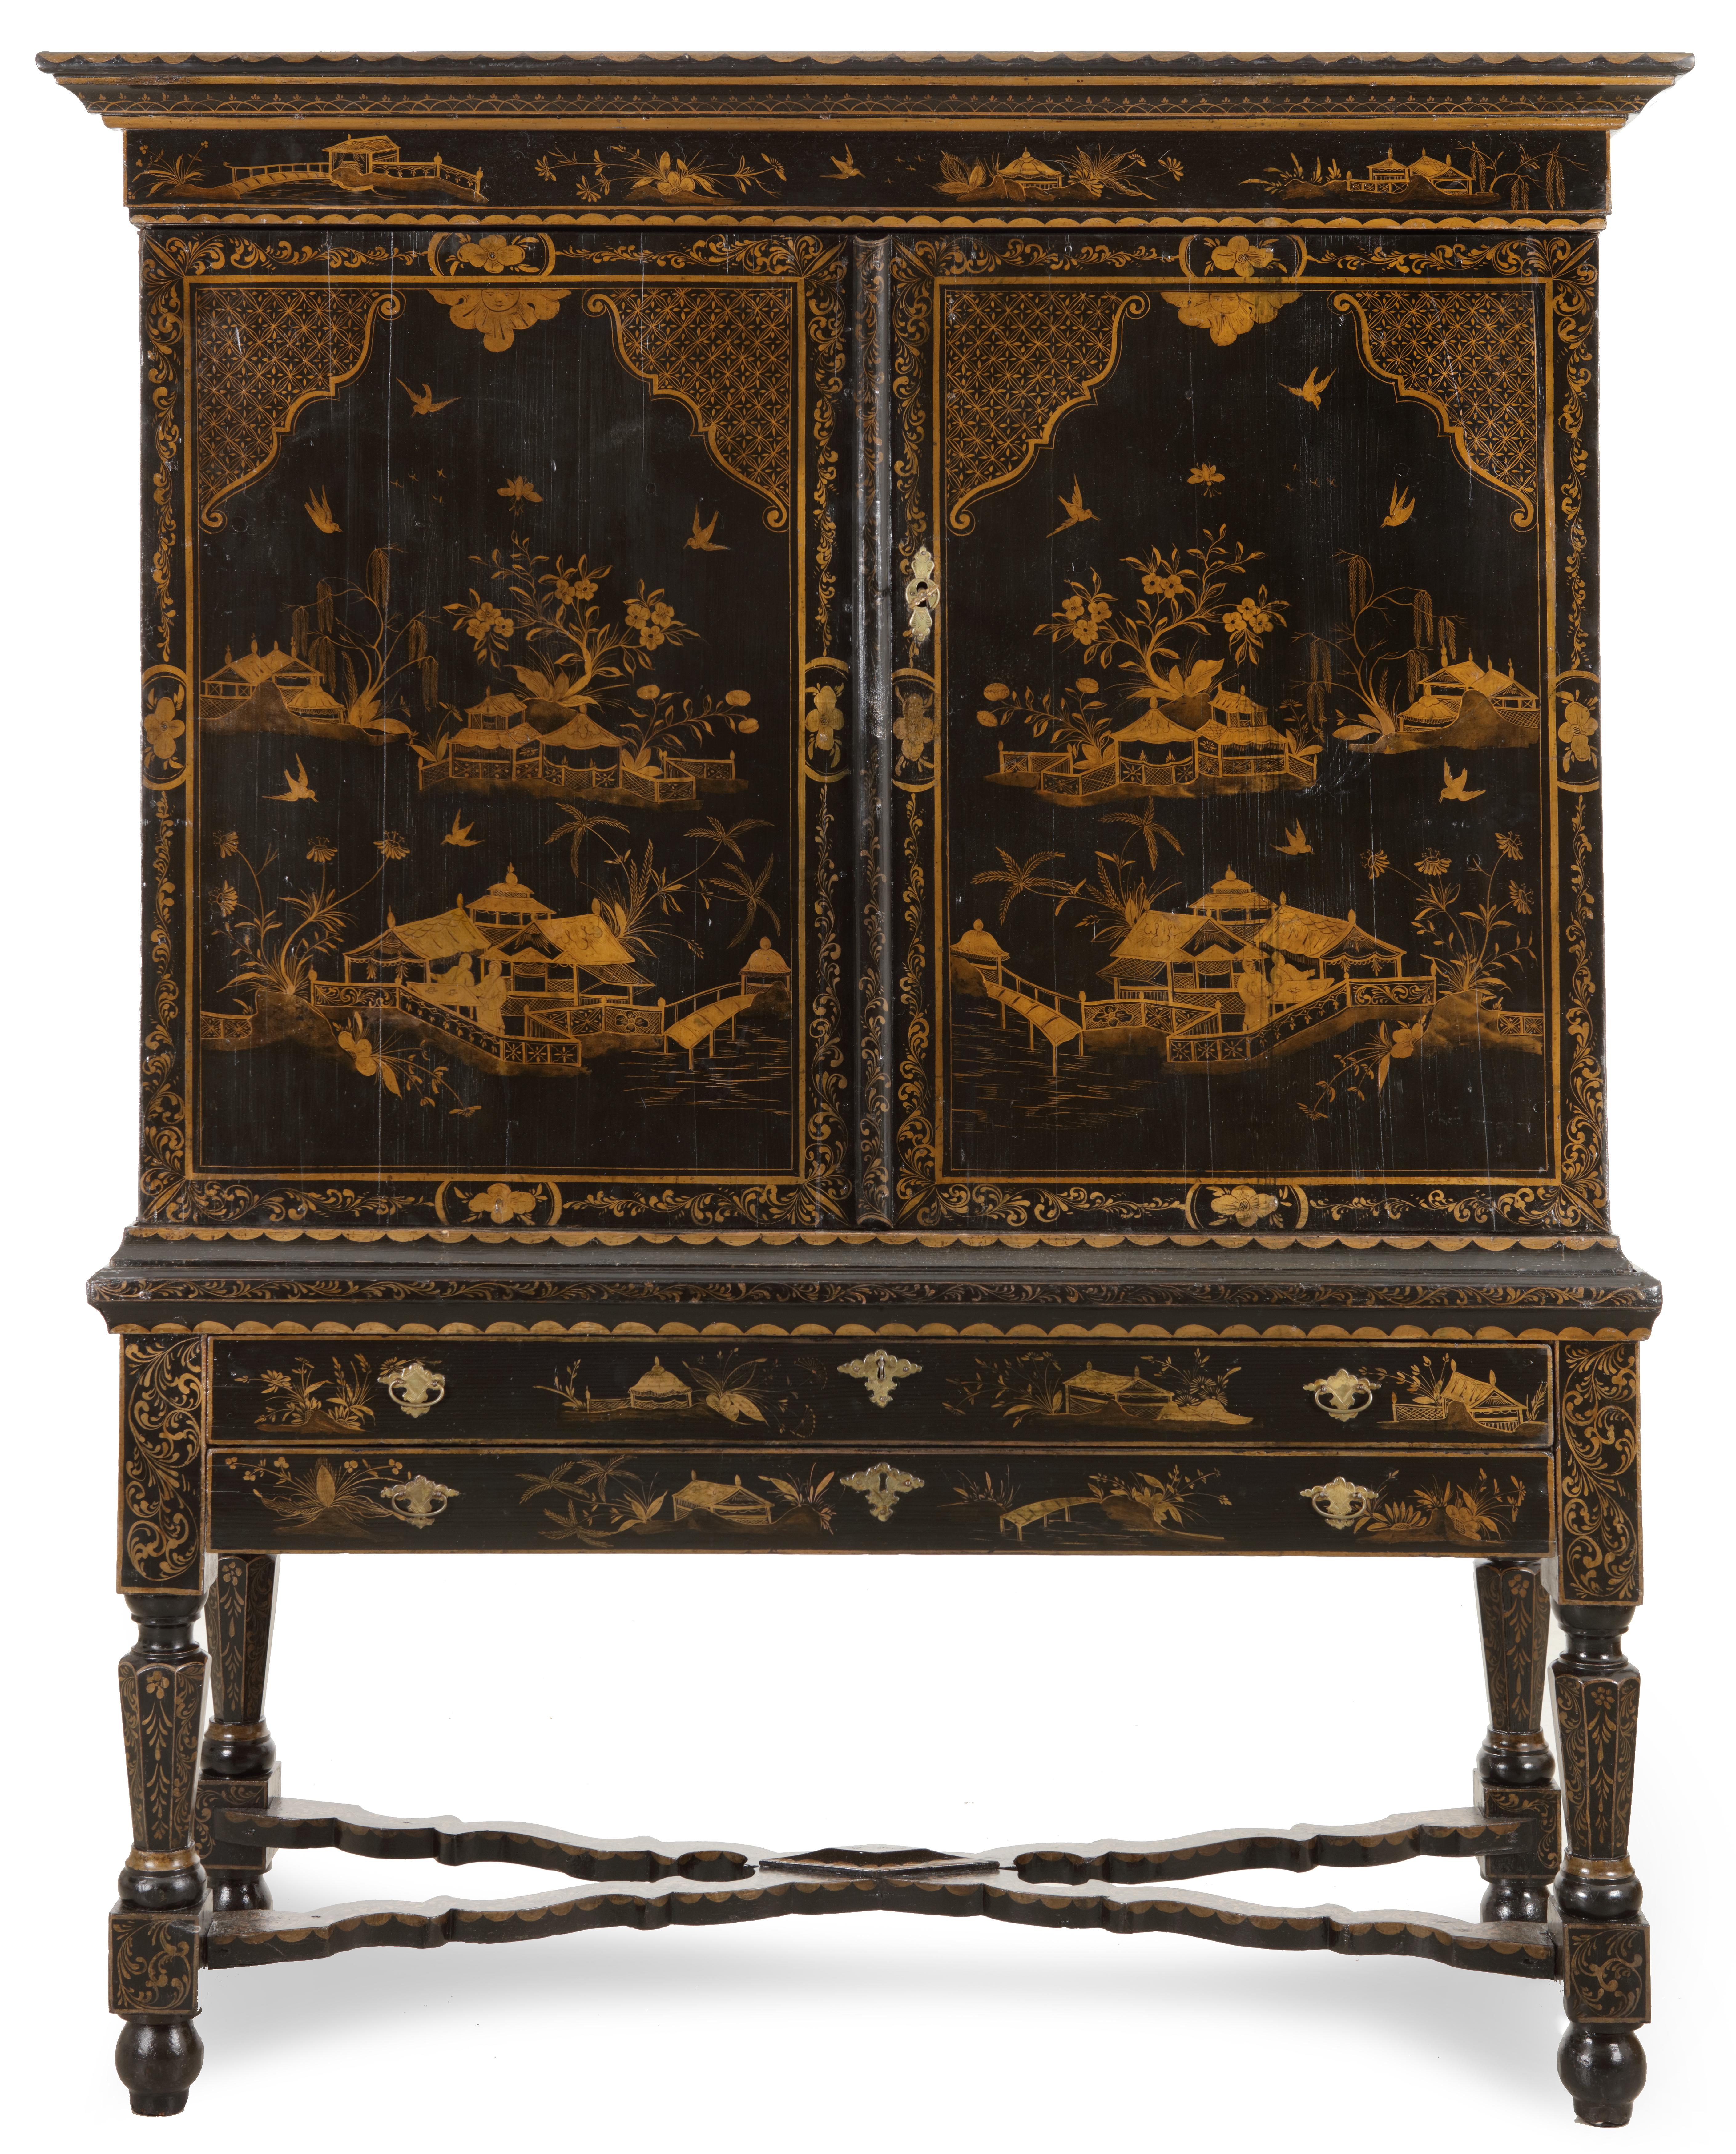 An exceptional Dutch lacquered cabinet on stand with chinoiserie decoration`

Holland, late 17th century`

Pinewood covered in black linseed-oil varnish and gold decorations of birds flying over flowering trees and pavilions at the water